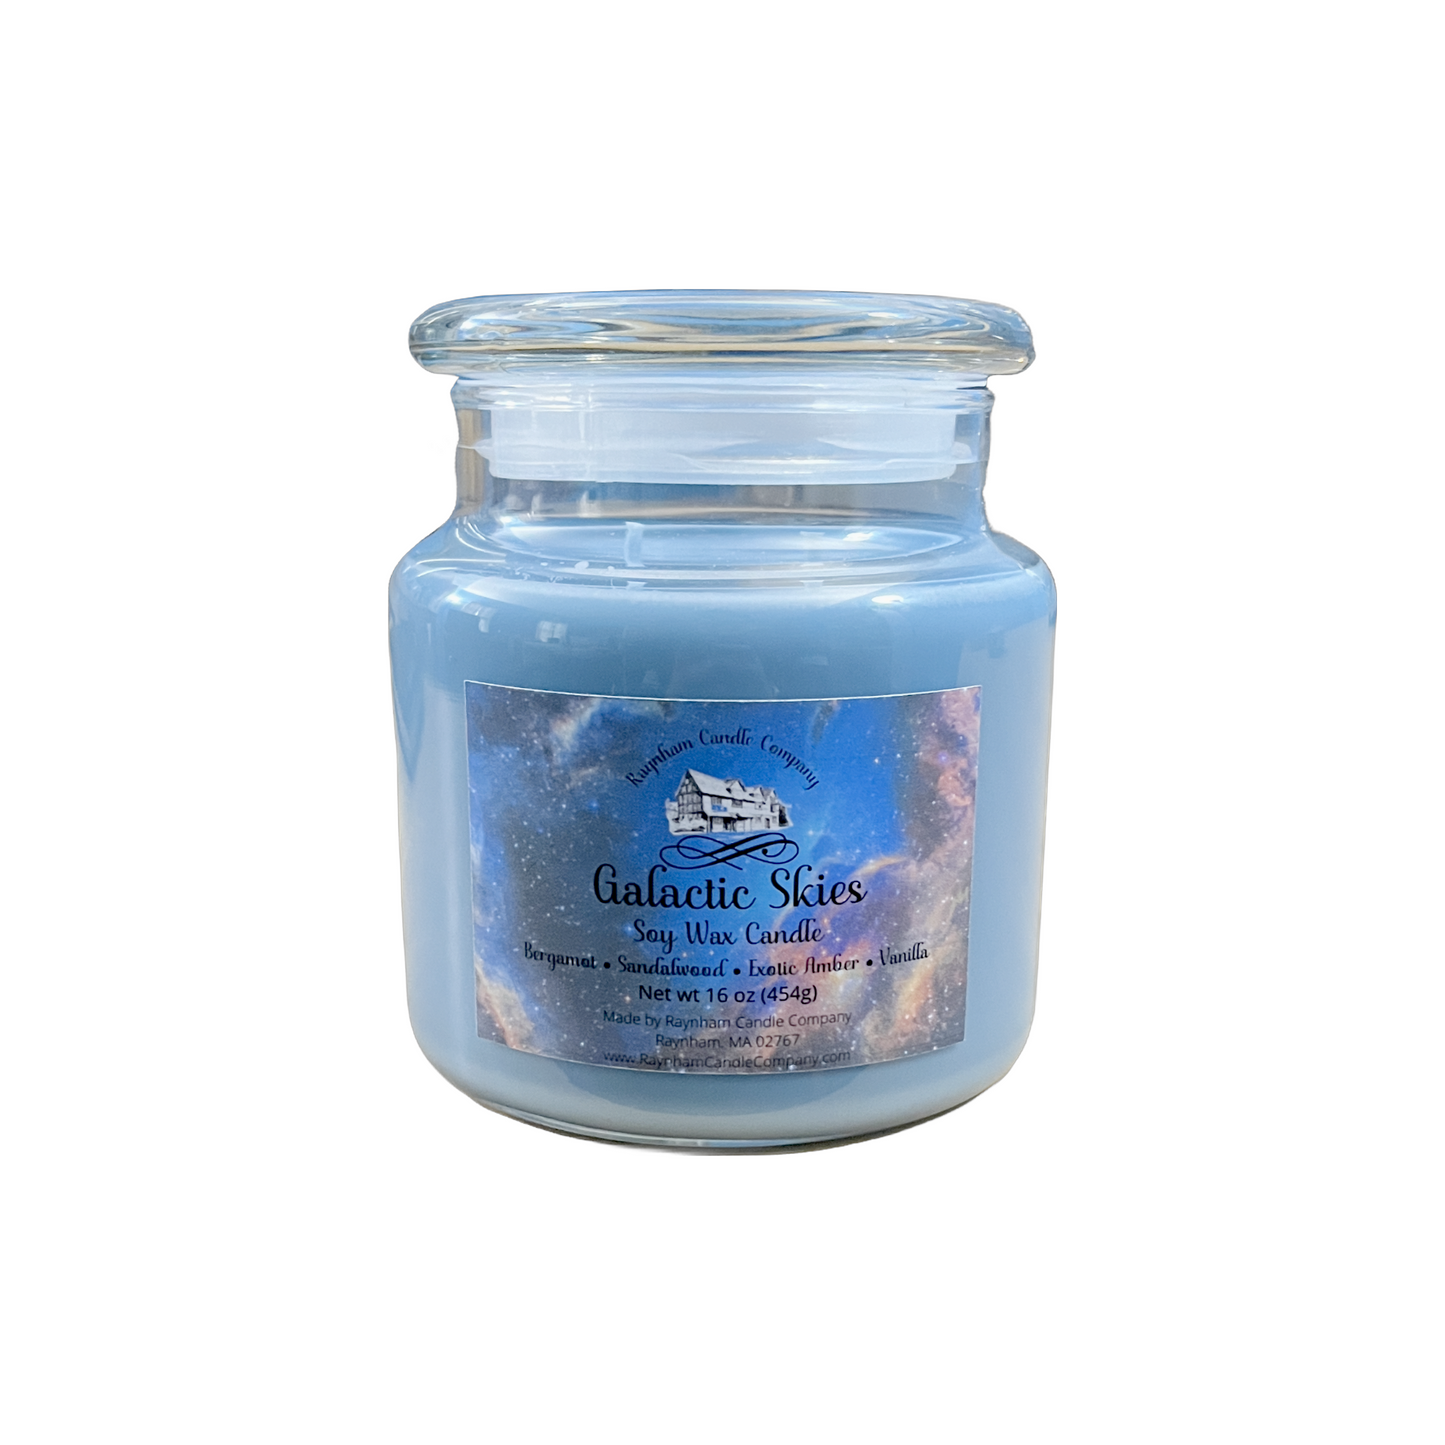 Galactic Skies - Premium  from Raynham Candle Company  - Just $5! Shop now at Raynham Candle Company 